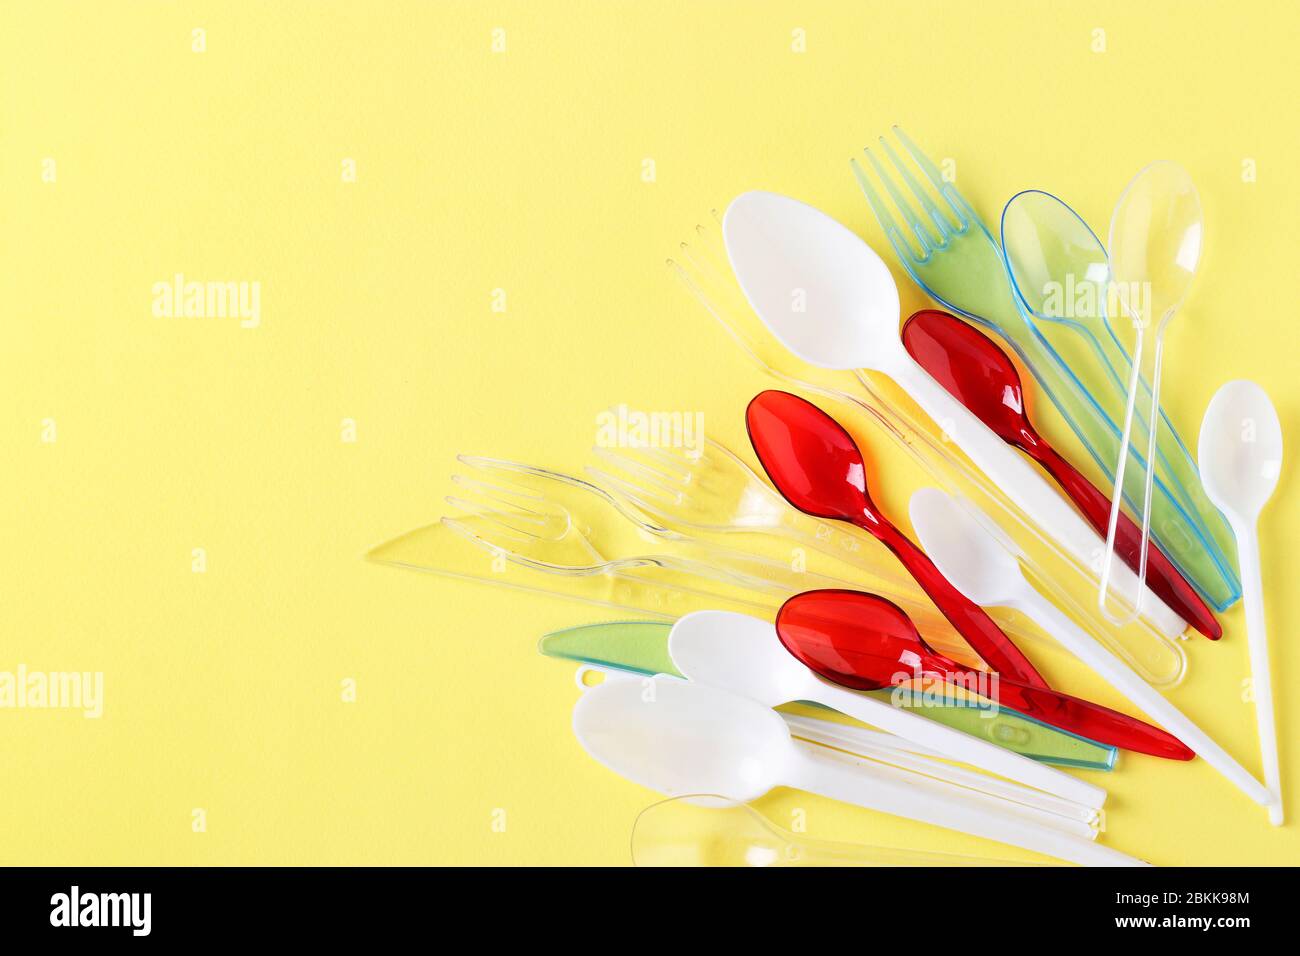 Plastic cutlery, forks, spoons and knives on yellow background. Pollution of the environment with plastic and microplastics. Copy space Stock Photo